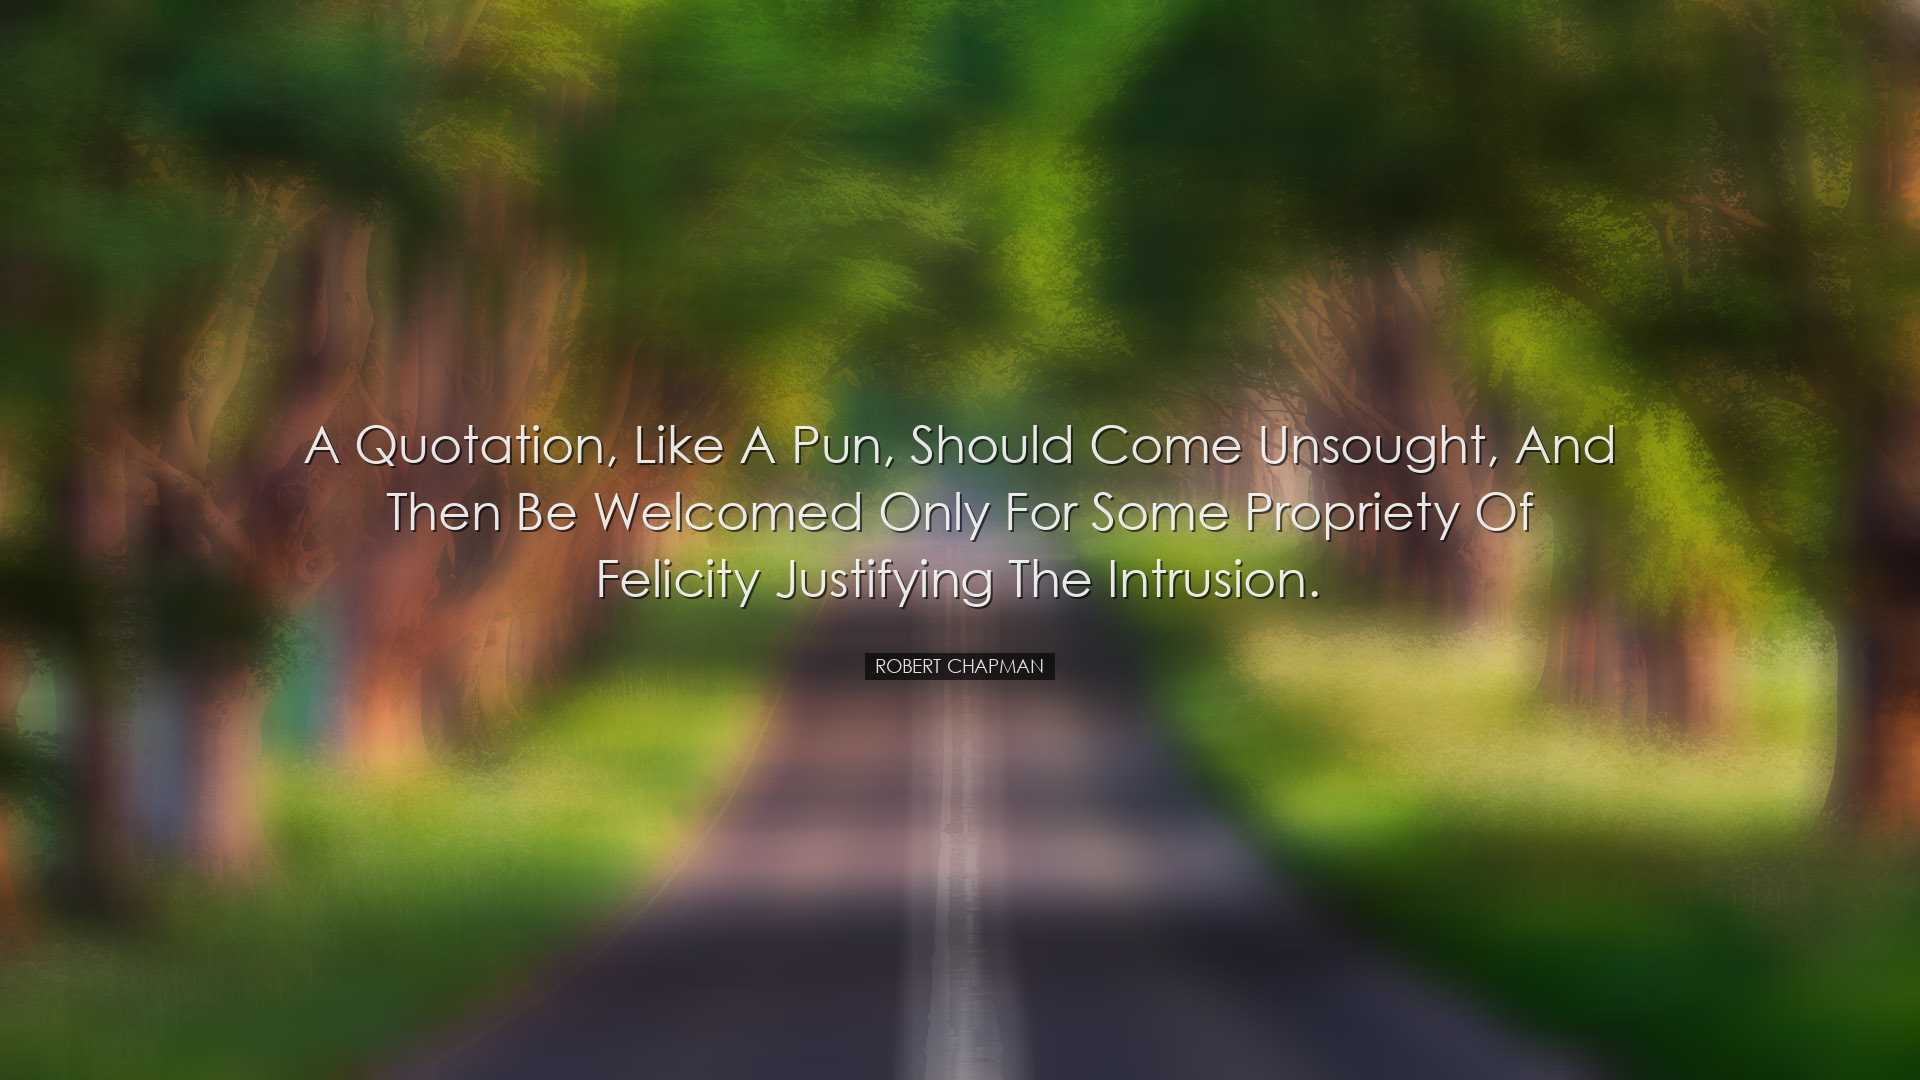 A quotation, like a pun, should come unsought, and then be welcome